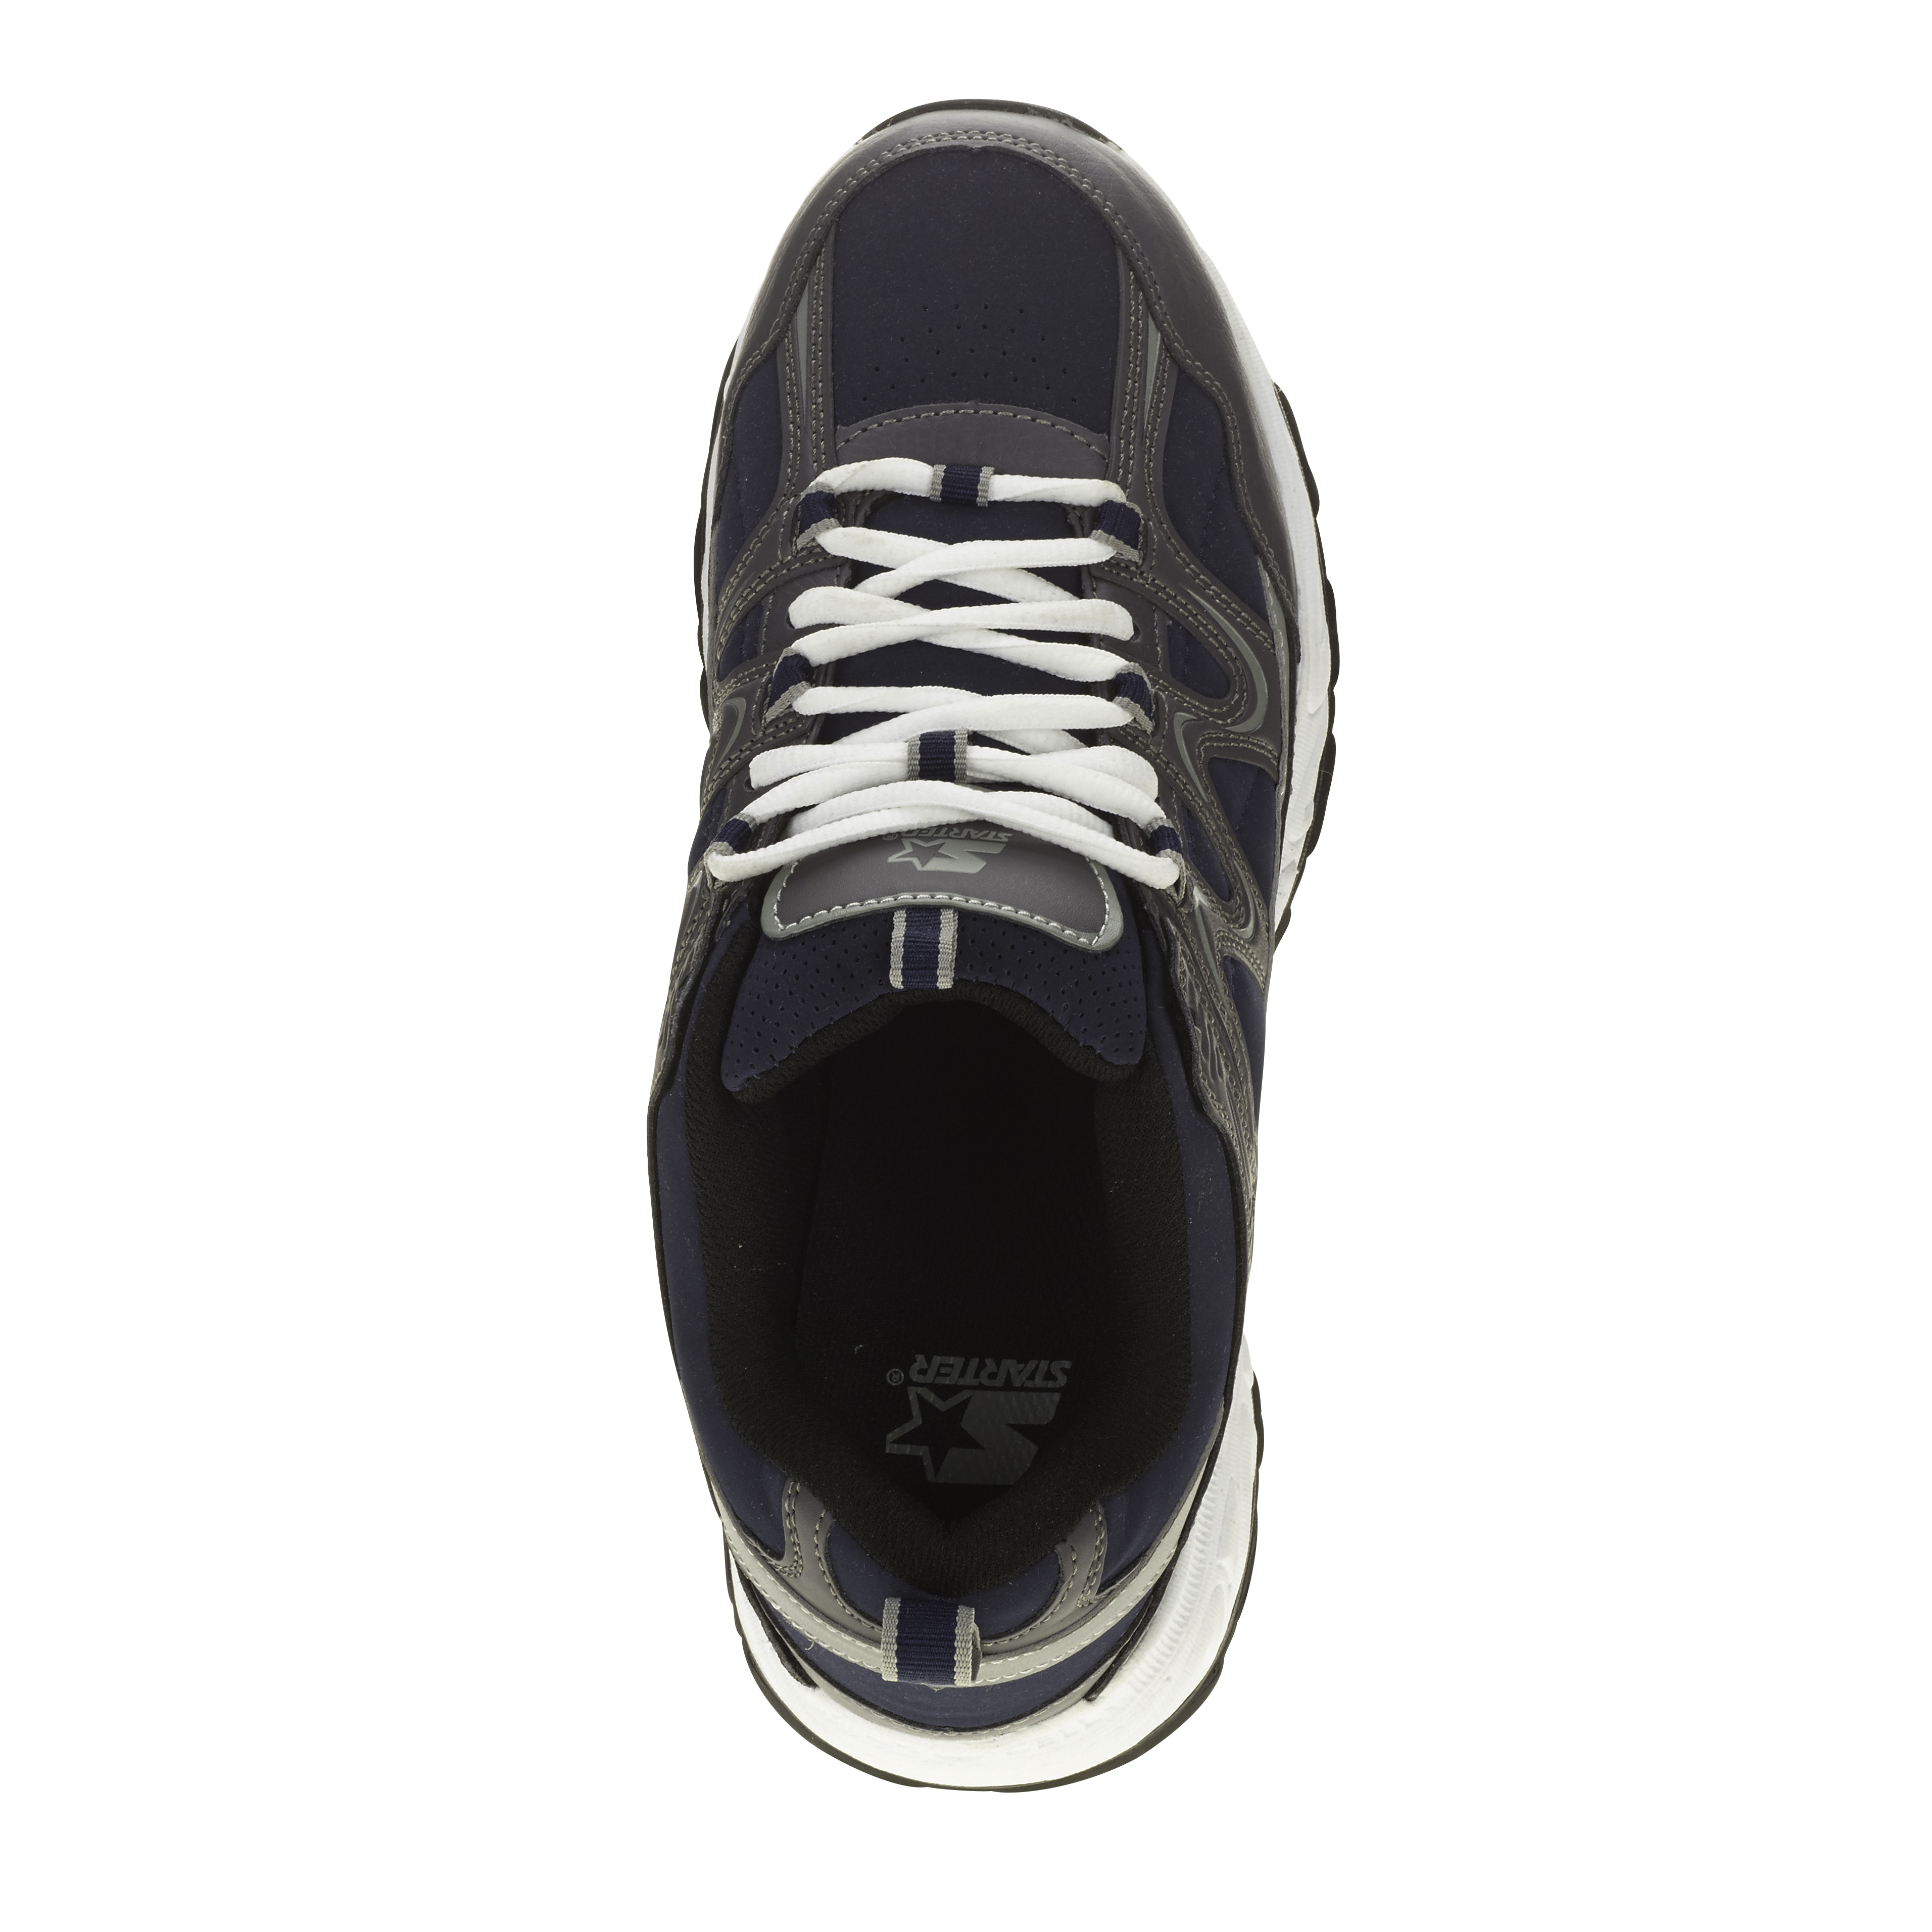 Starter Men's Chunky Wide Width Athletic Shoe - image 2 of 2